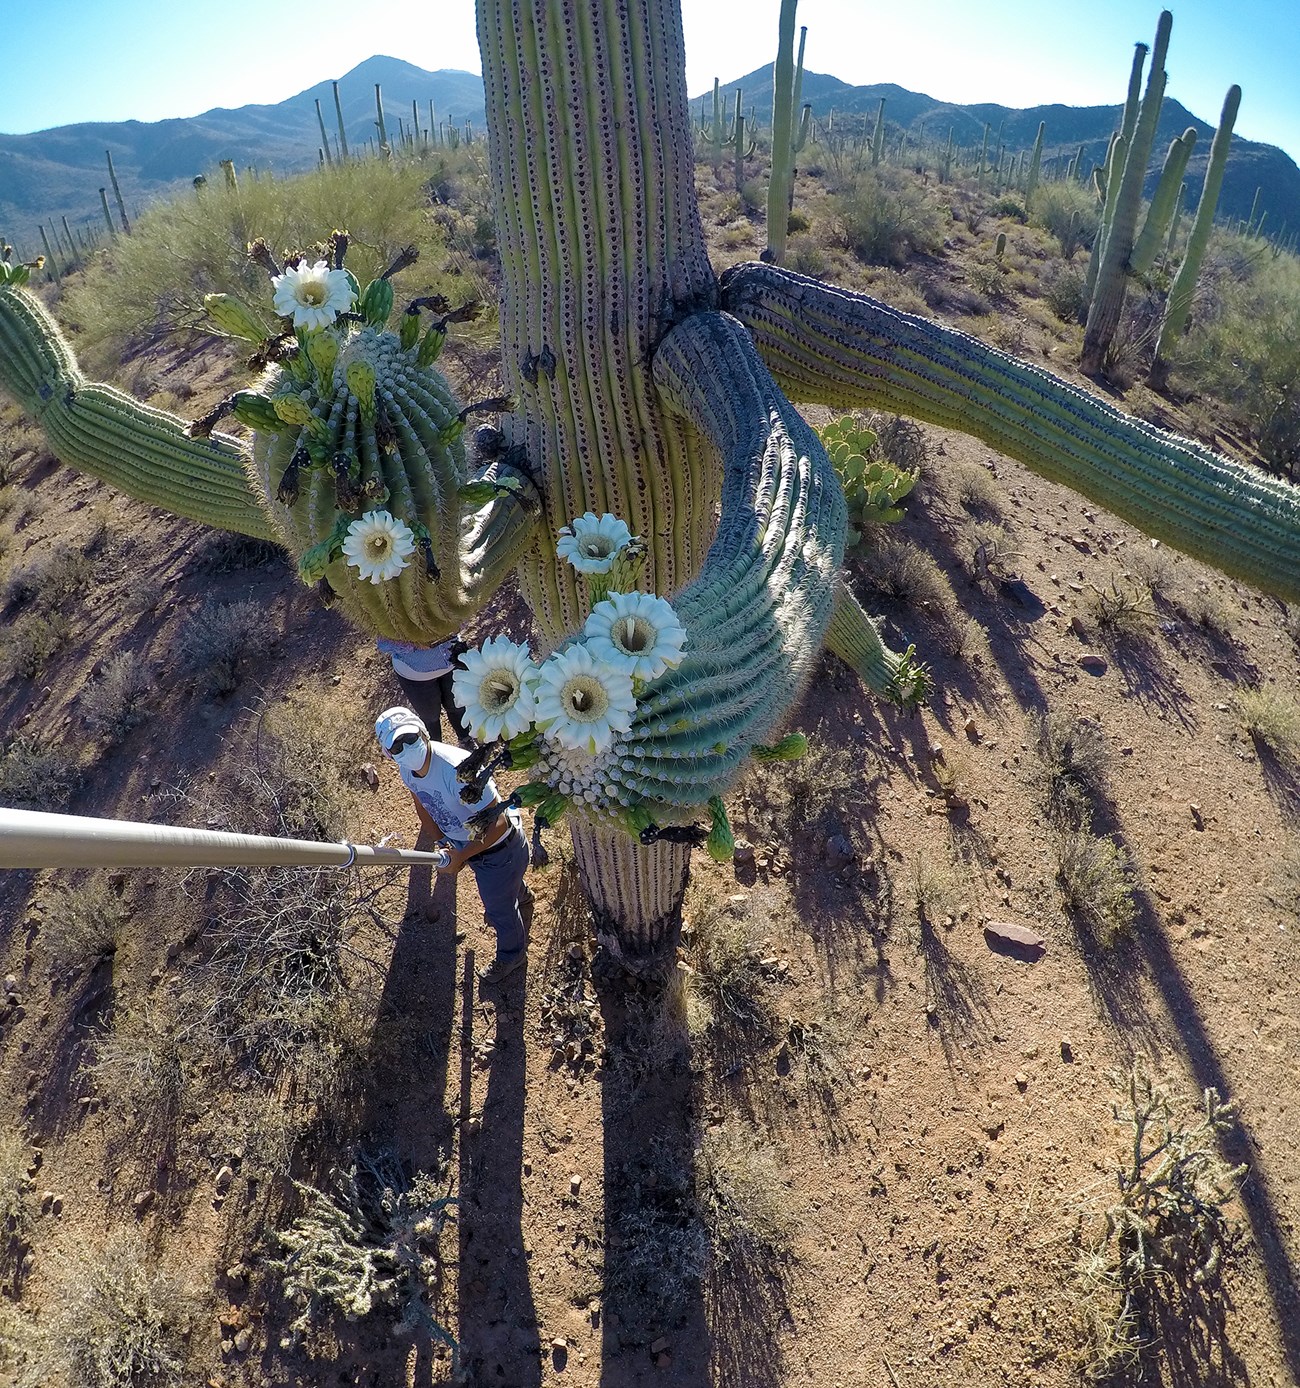 View from above a tall, flowering saguaro cactus where a man is looking up holding an instrument